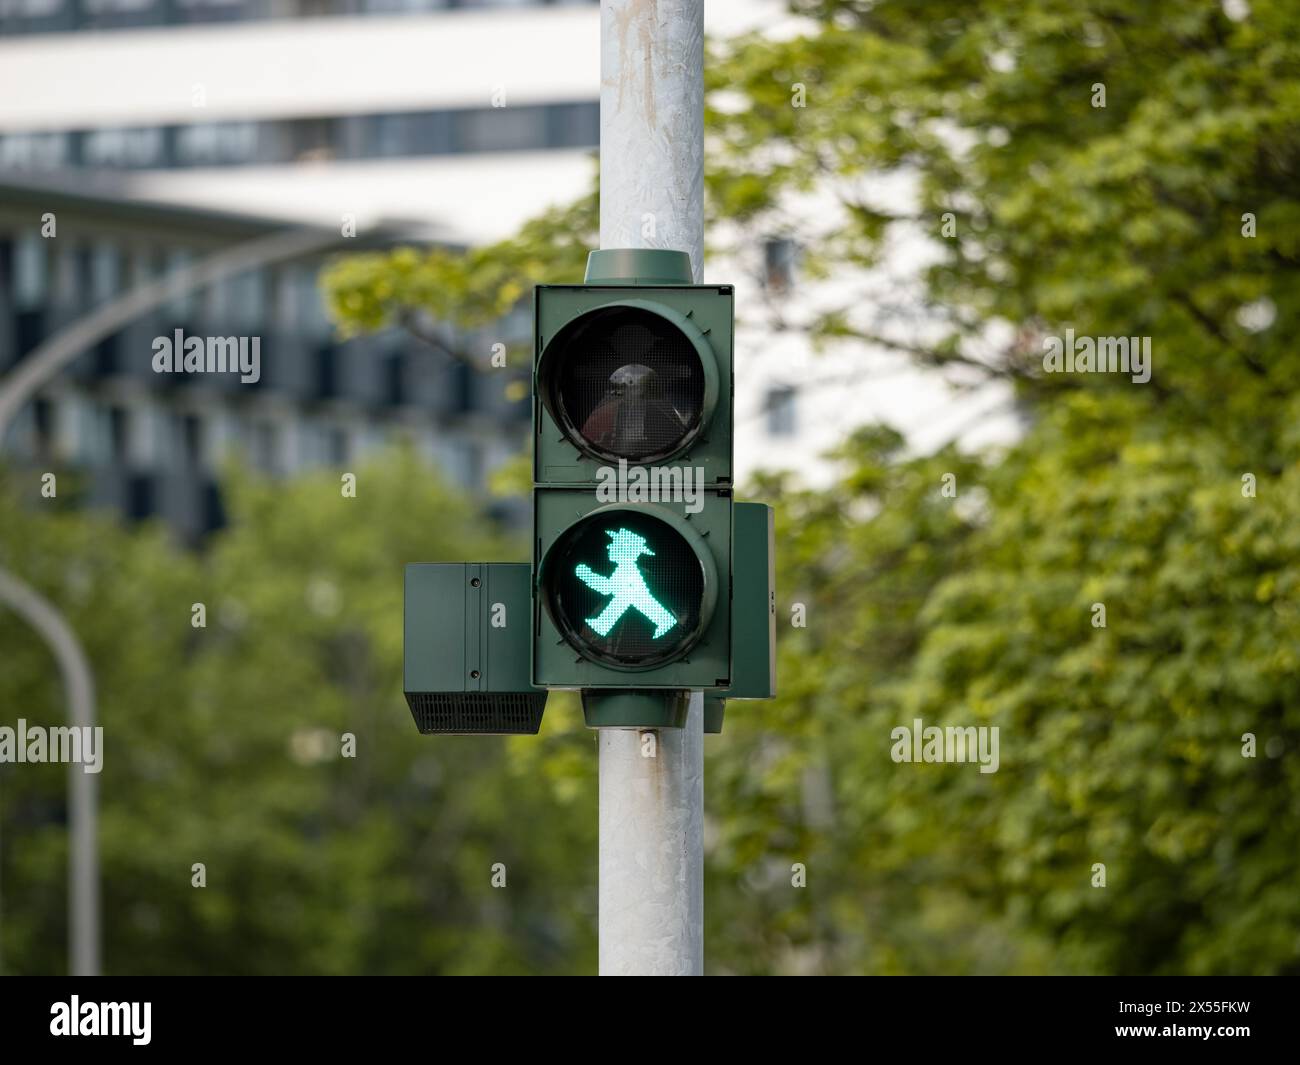 Pedestrian traffic light in Germany. Green light icon at an intersection. Crossing the road is allowed during the walking man symbol. Stock Photo